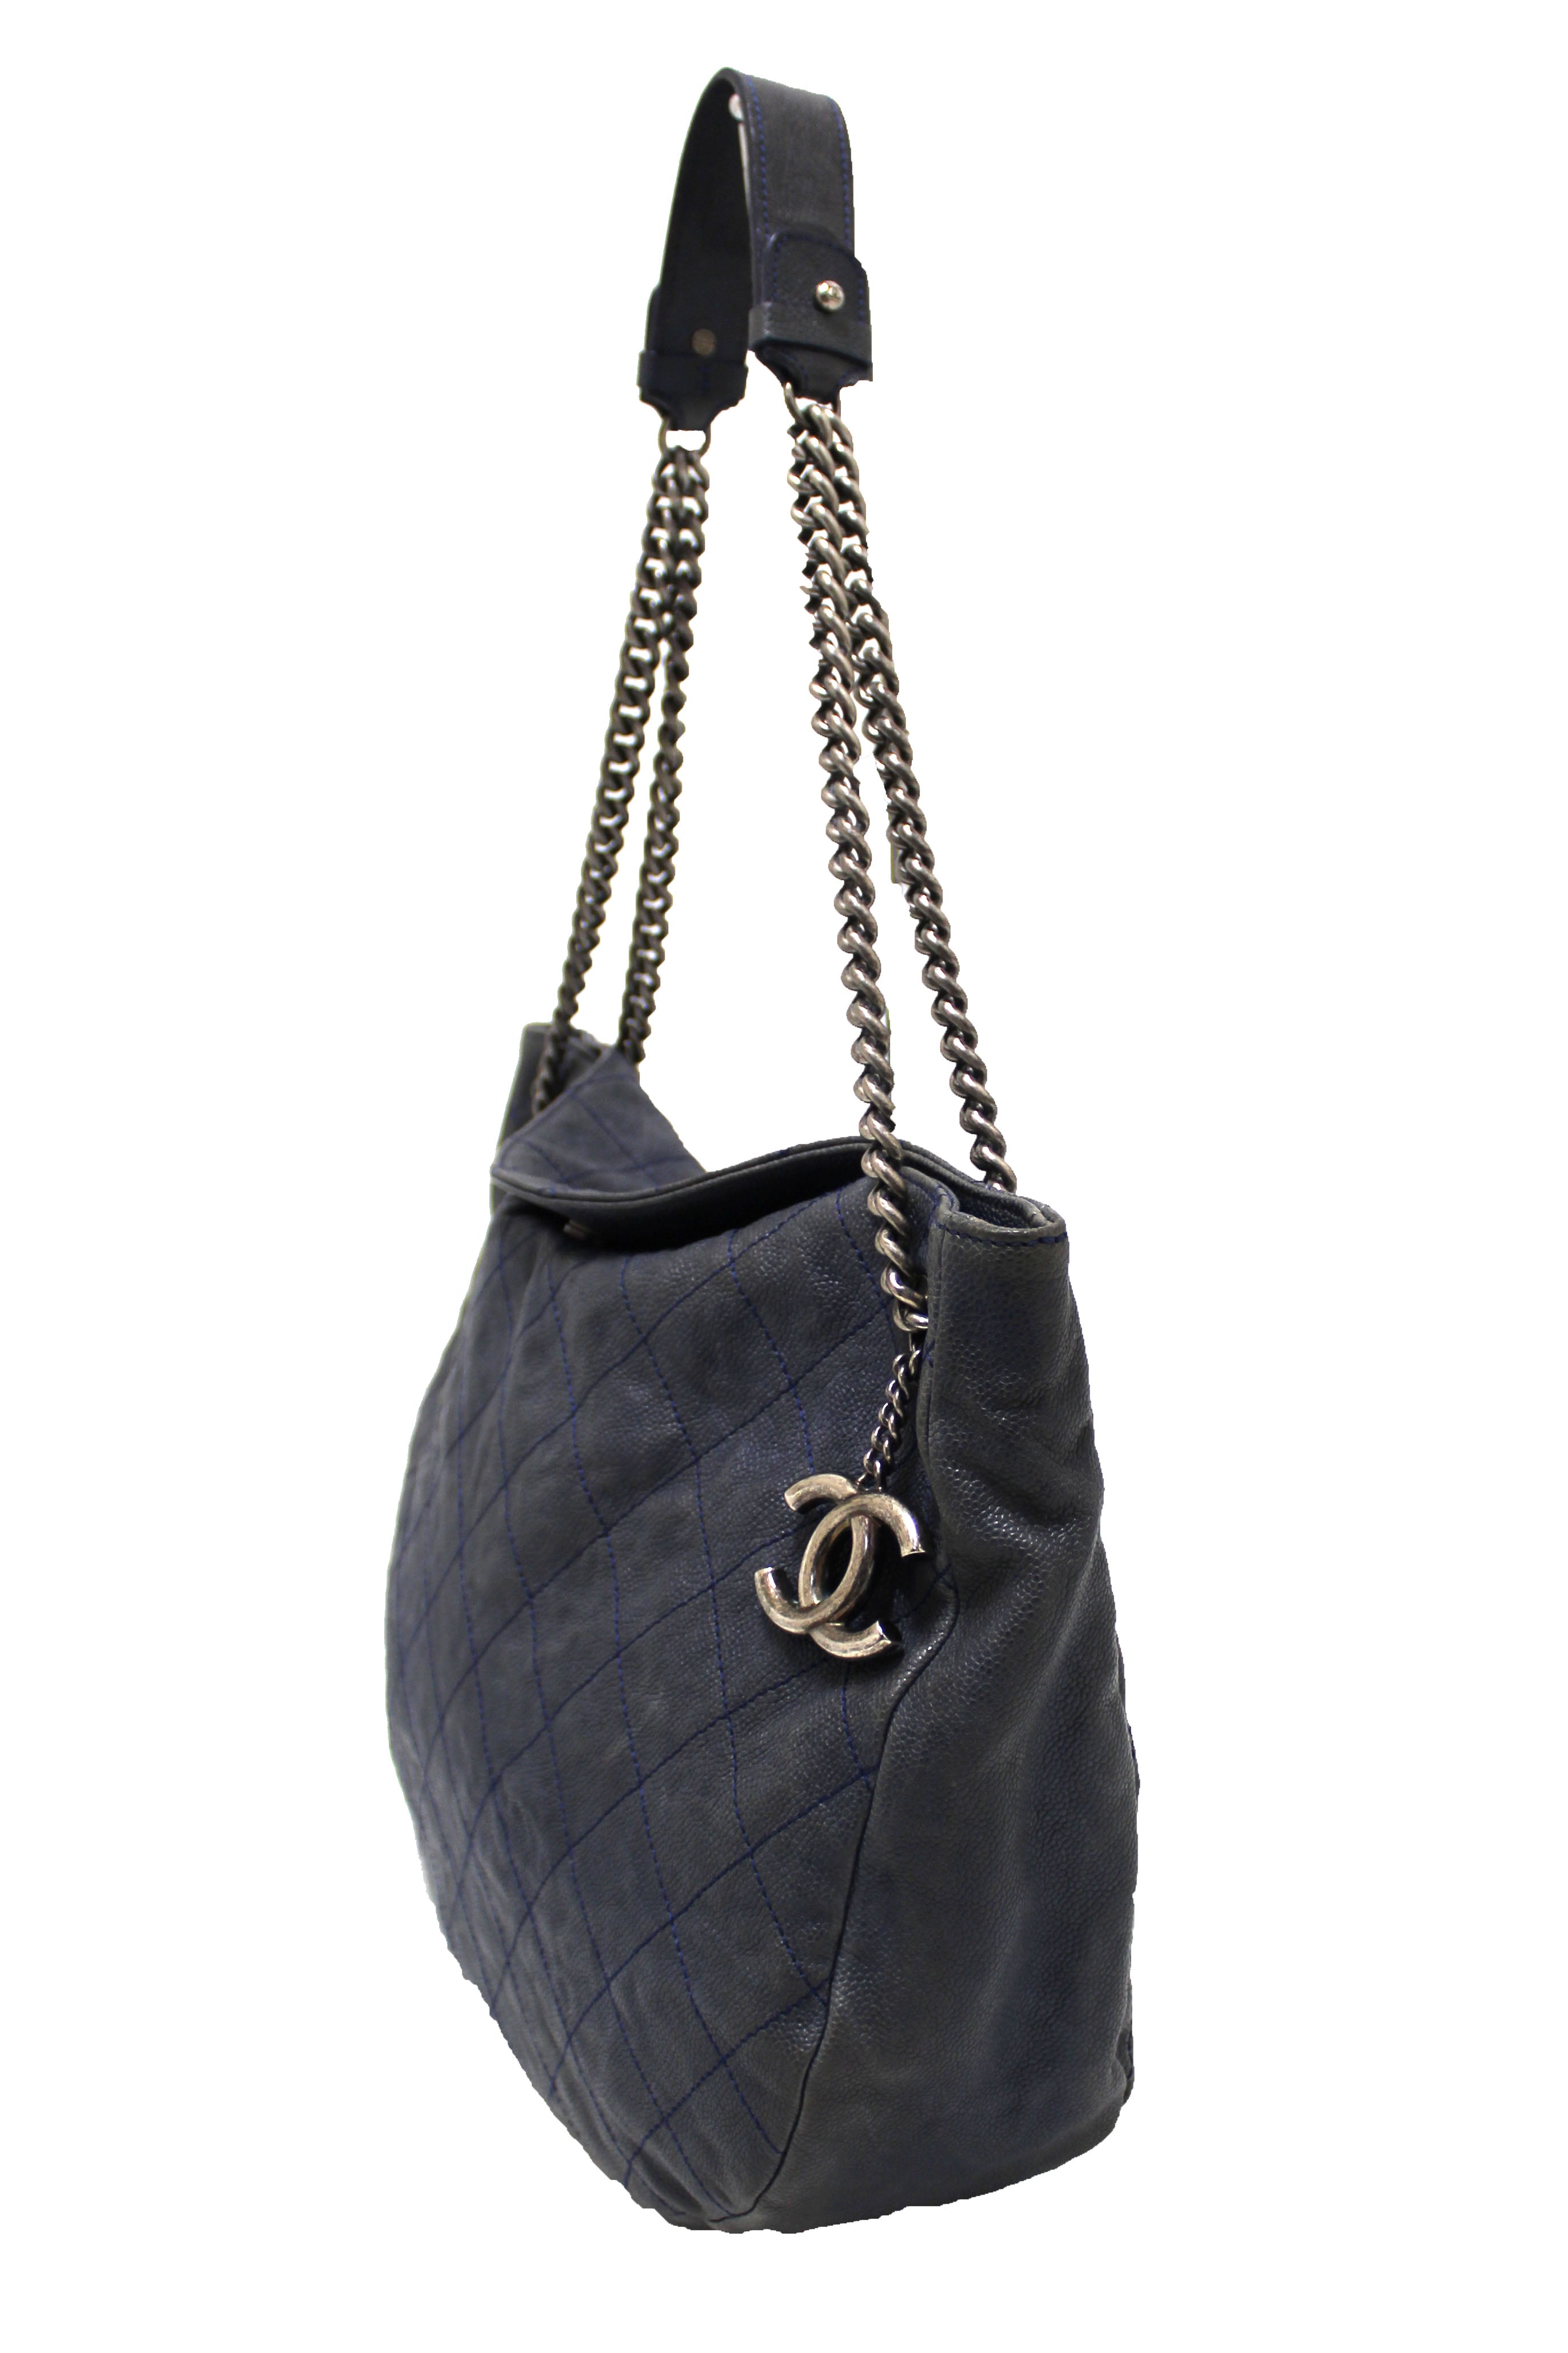 Authentic Chanel Blue Quilted Caviar Leather Hobo Shoulder Bag